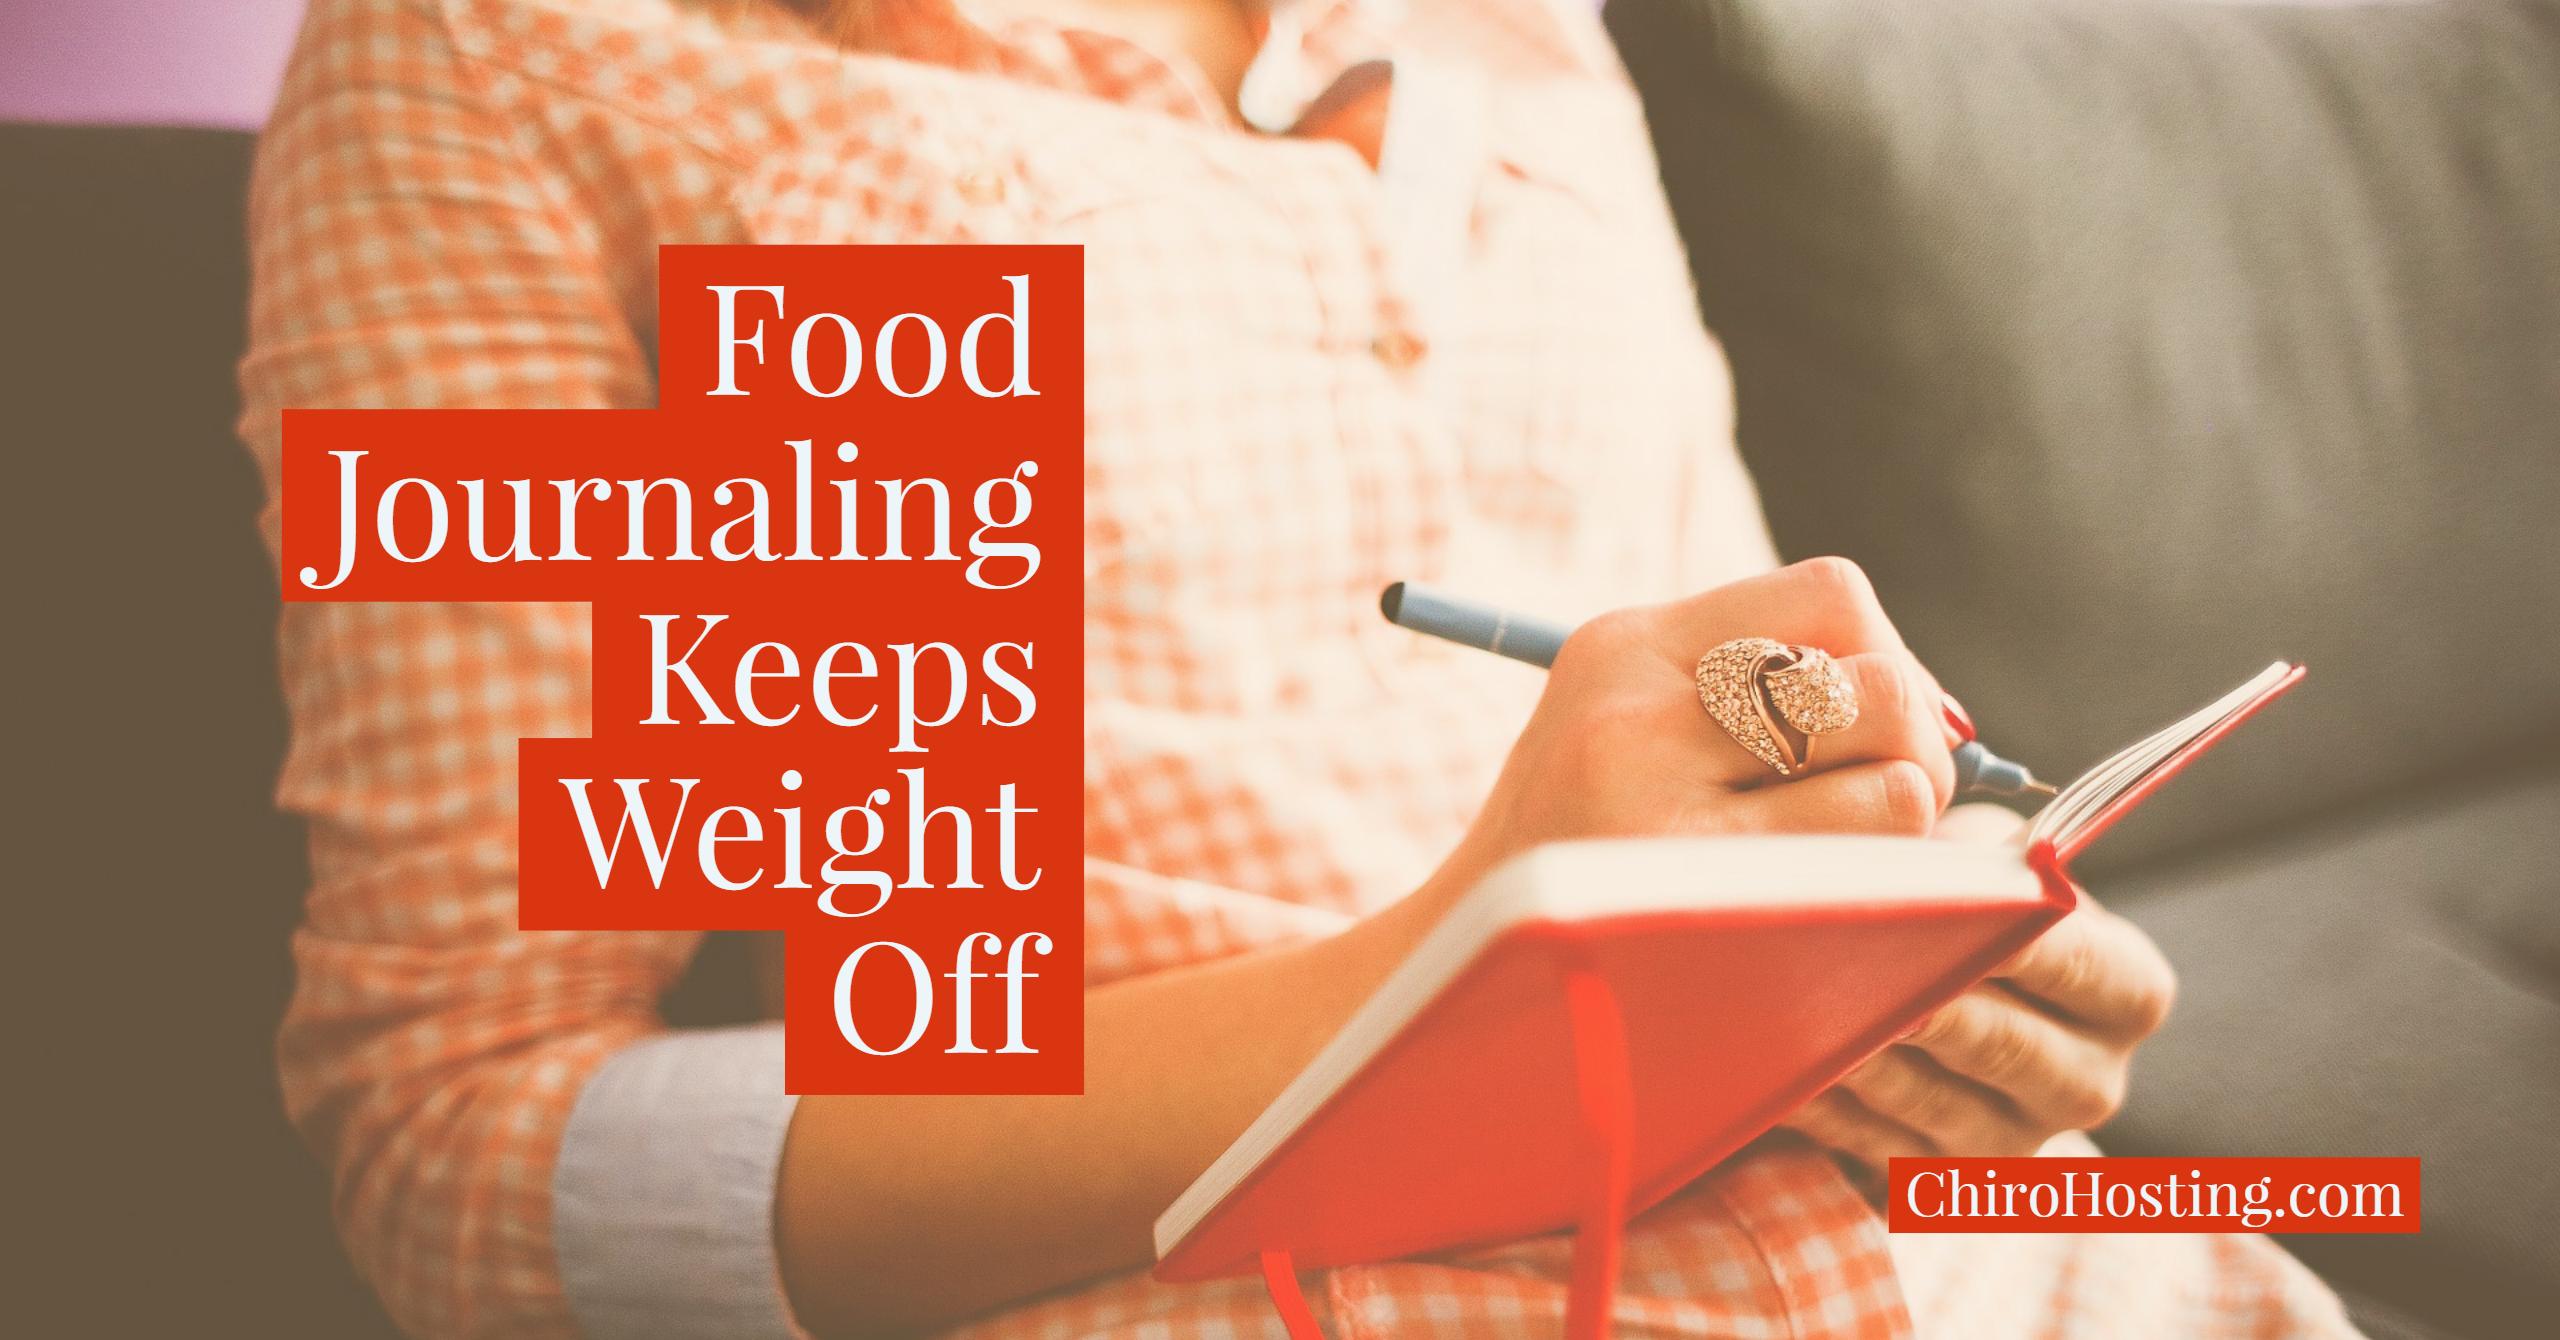 Keeping Food Journal to Keep Weight Off